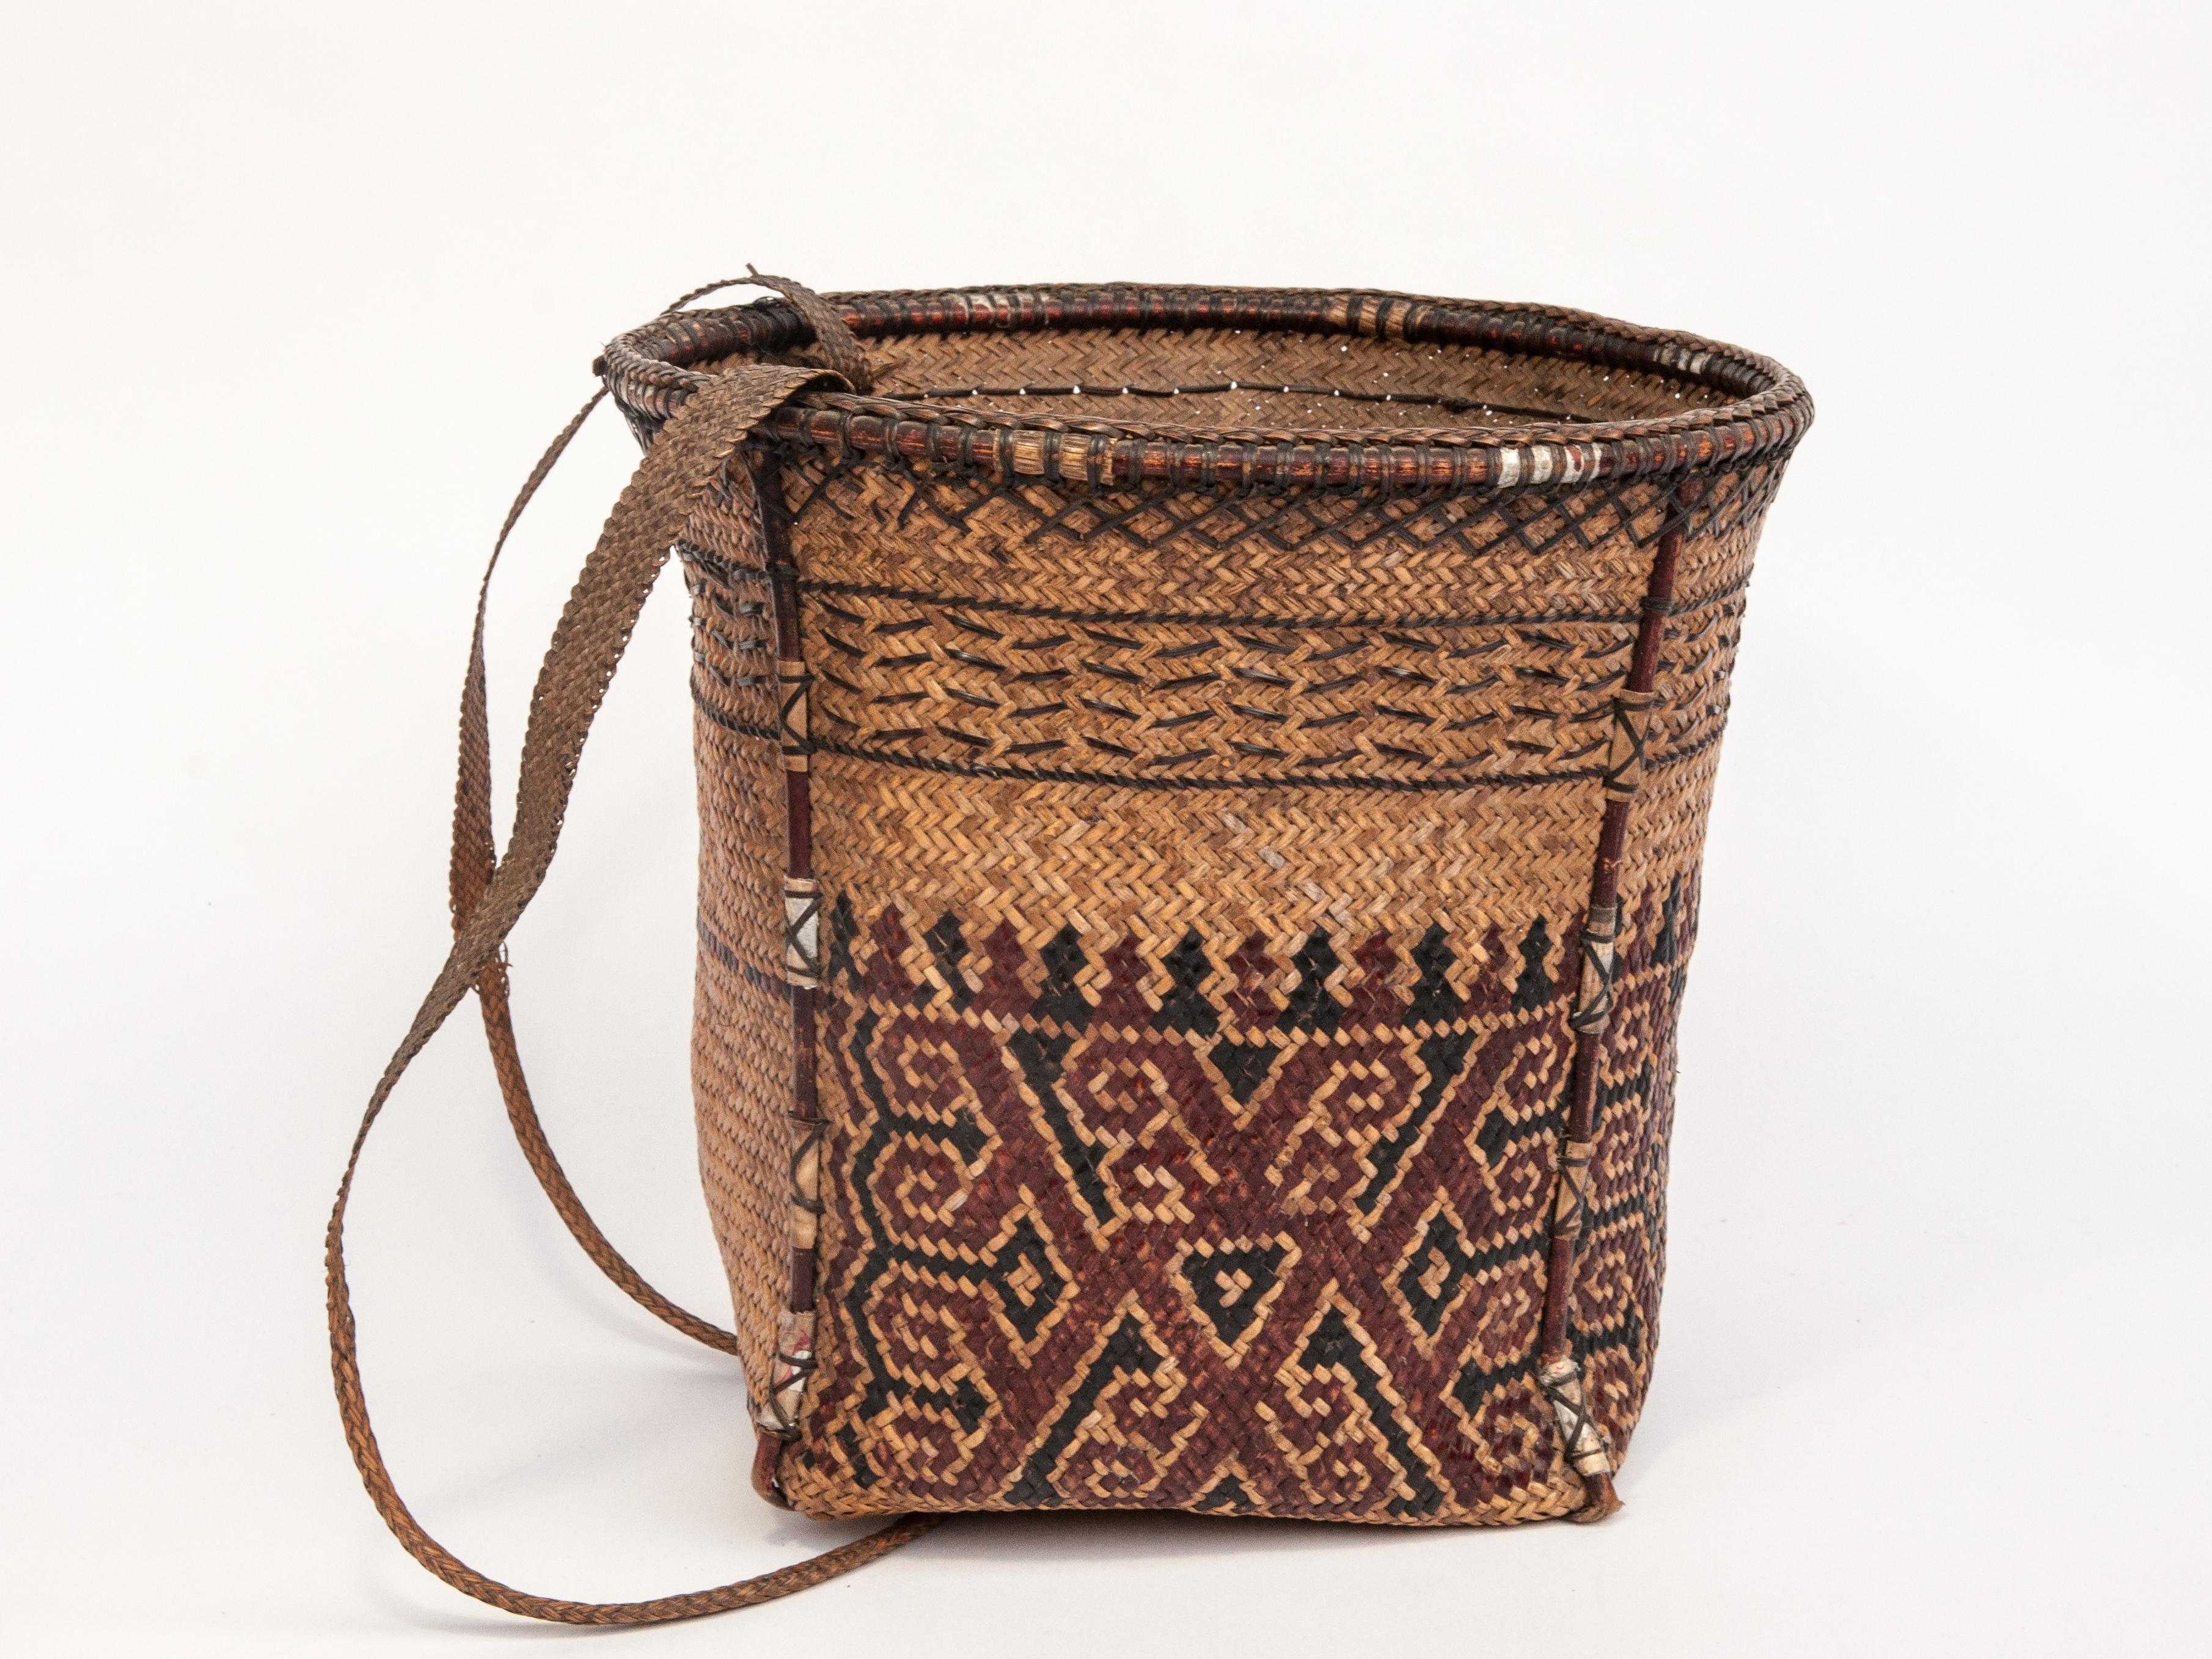 Hand-Crafted Vintage Carrying Basket Woven Design, Ngaju Dayak of Borneo, Mid-20th Century